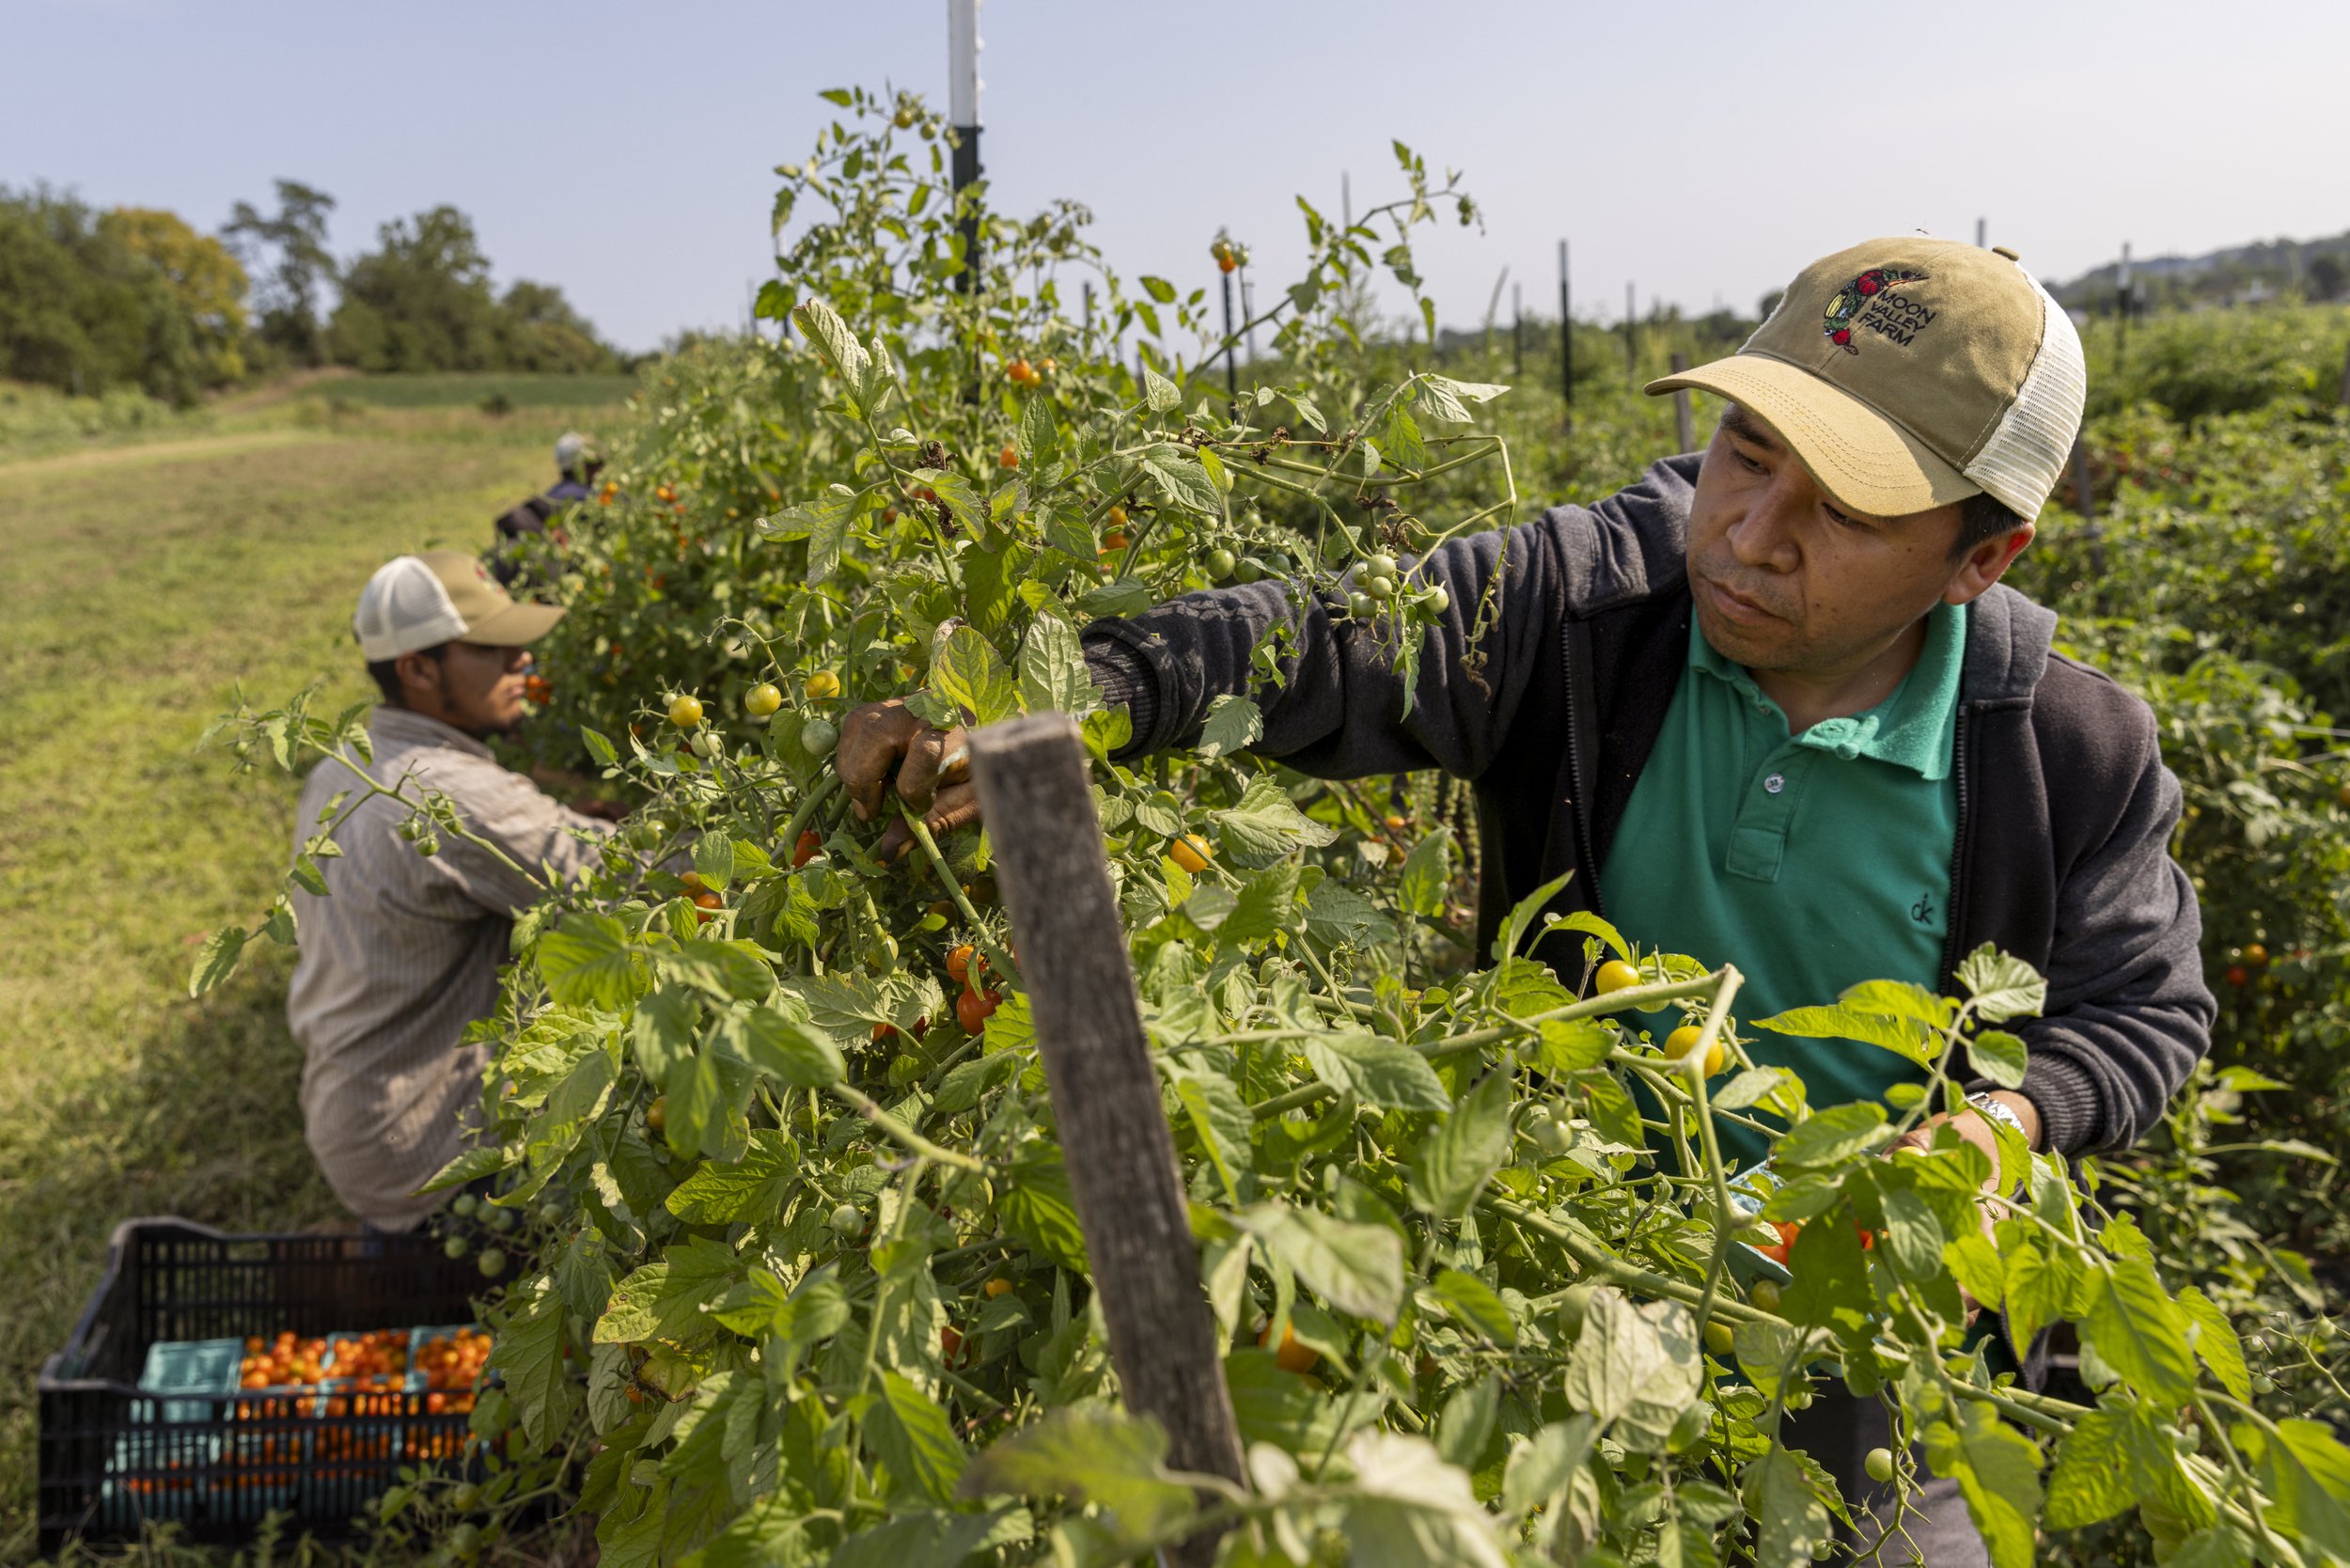  Joe Ramirez Bautista, right, and Juan Manuel Castillo Carmona harvest sun gold tomatoes at Moon Valley Farm in Woodsboro Md., on Aug. 9, 2023. The certified organic farm is owned and operated by first-generation farmer, Emma Jagoz.  